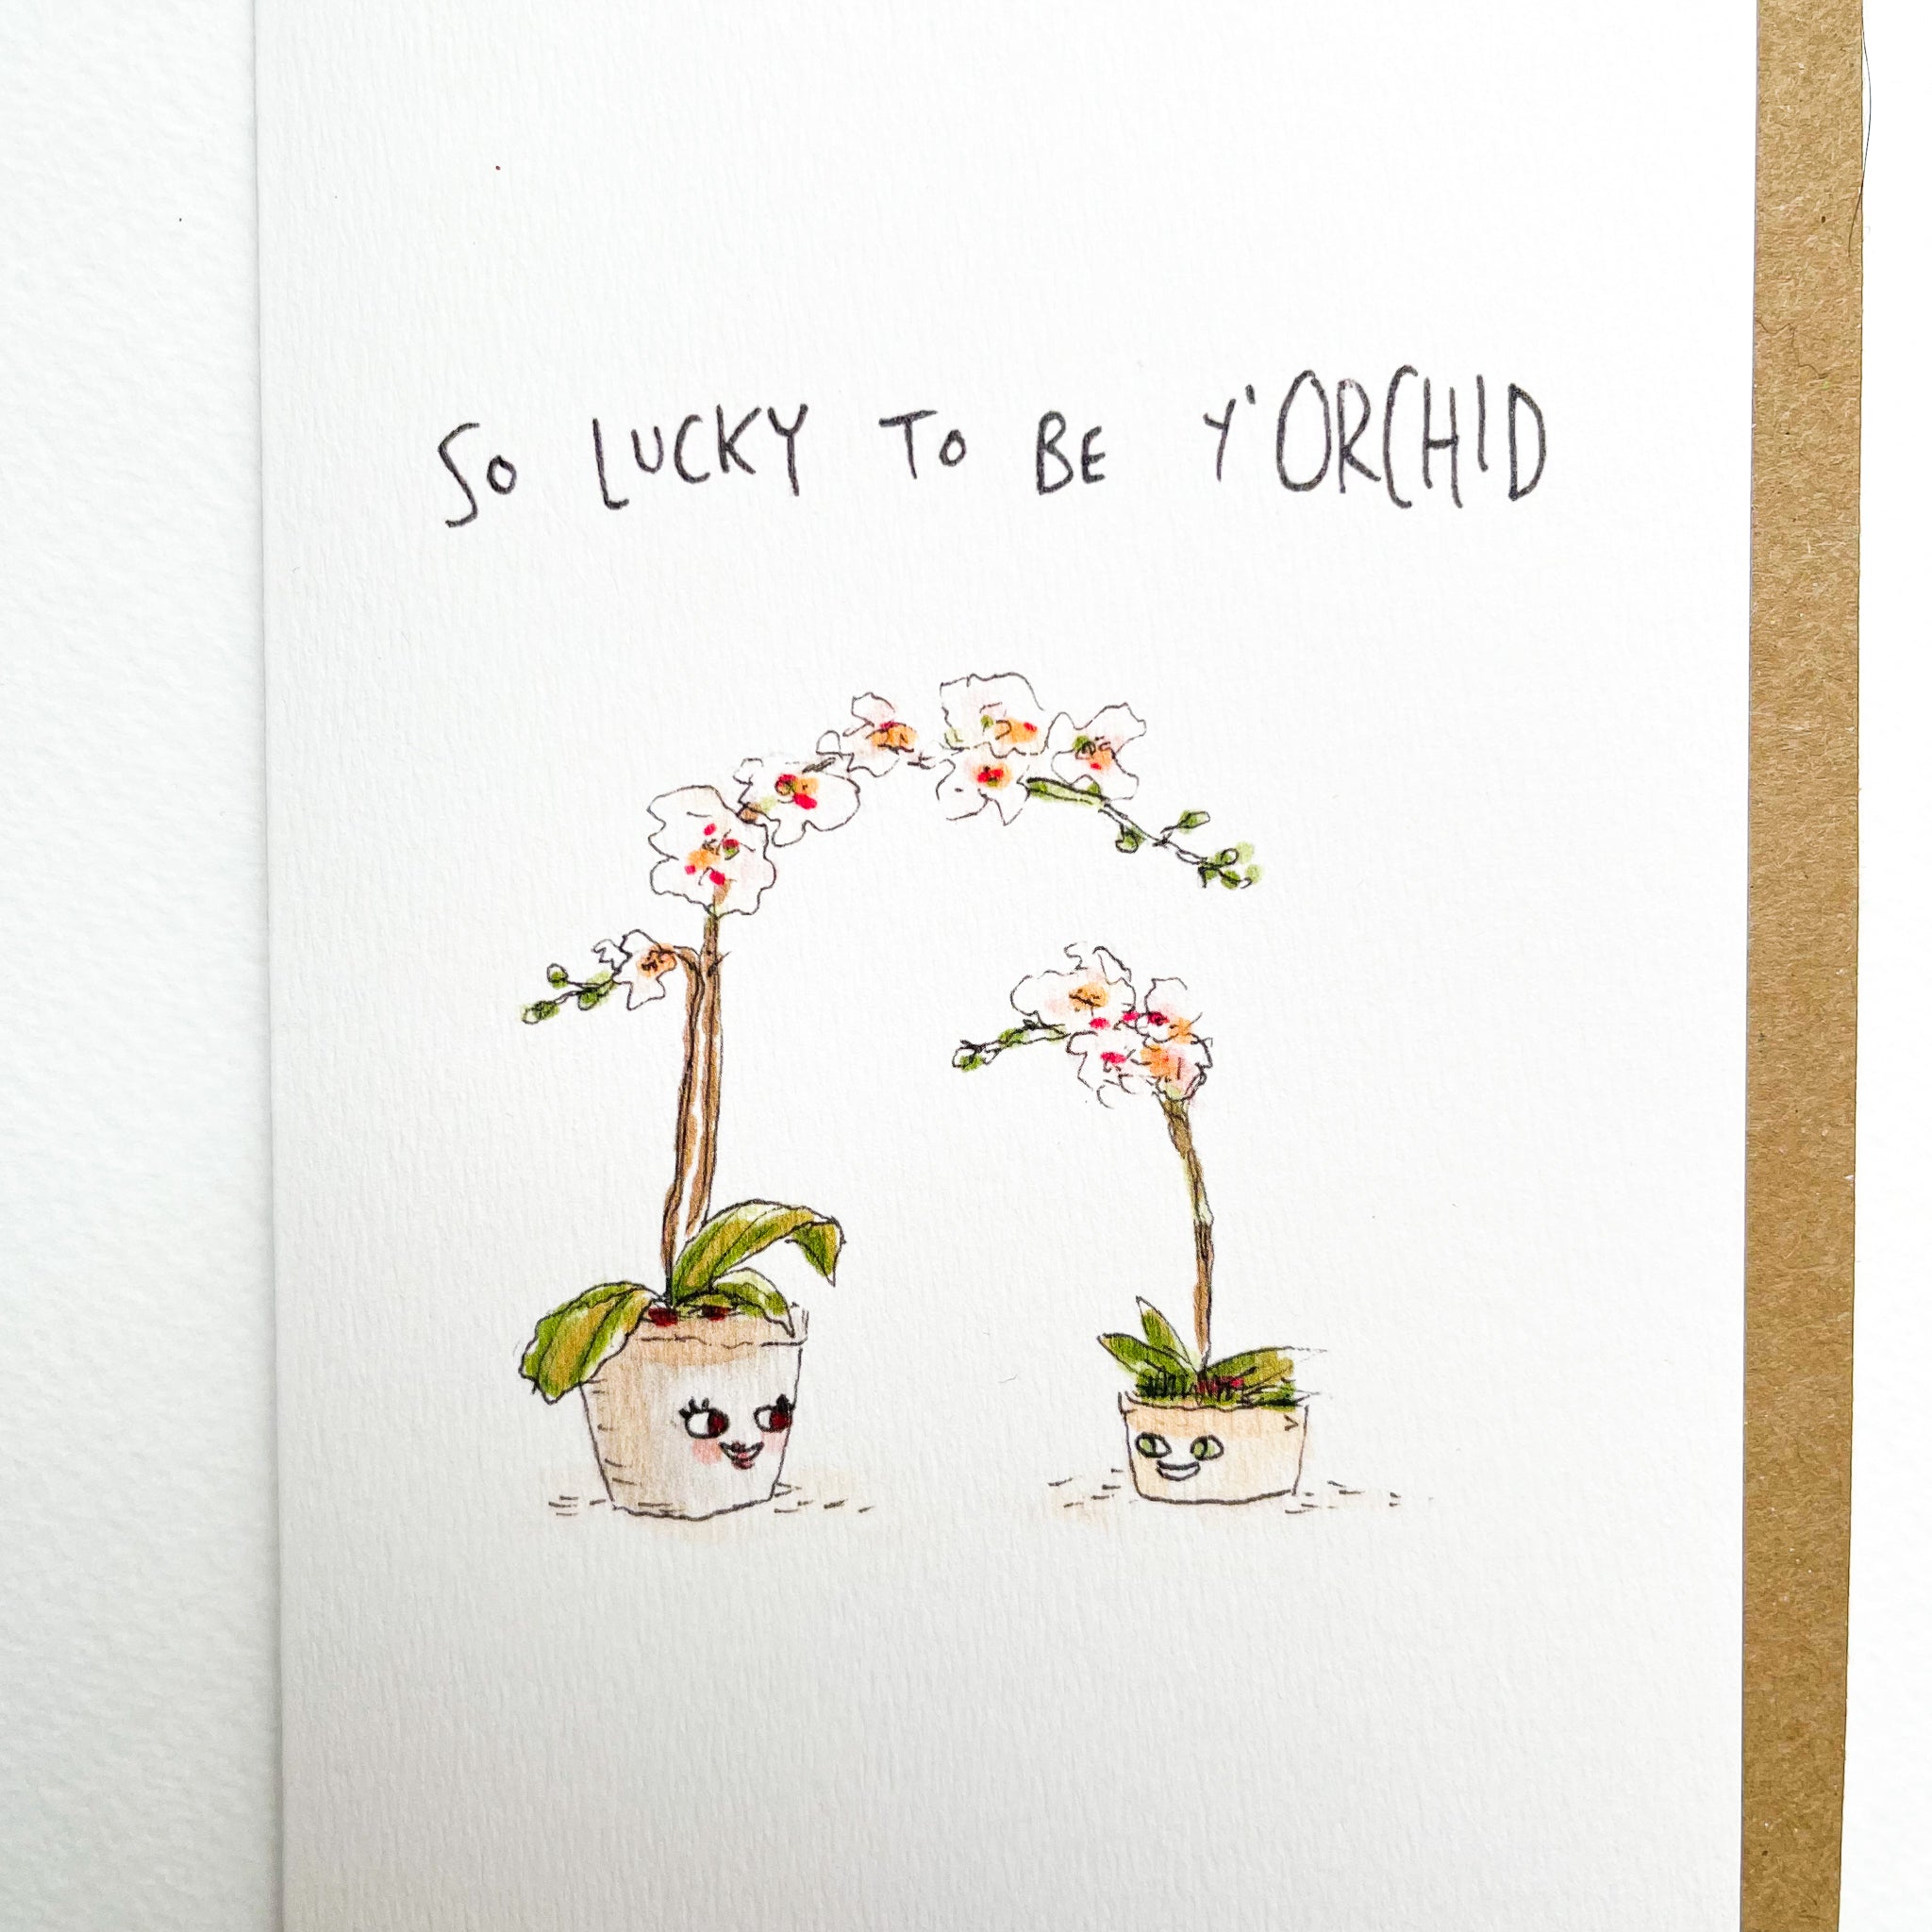 So Lucky To Be Y'Orchid - Well Drawn